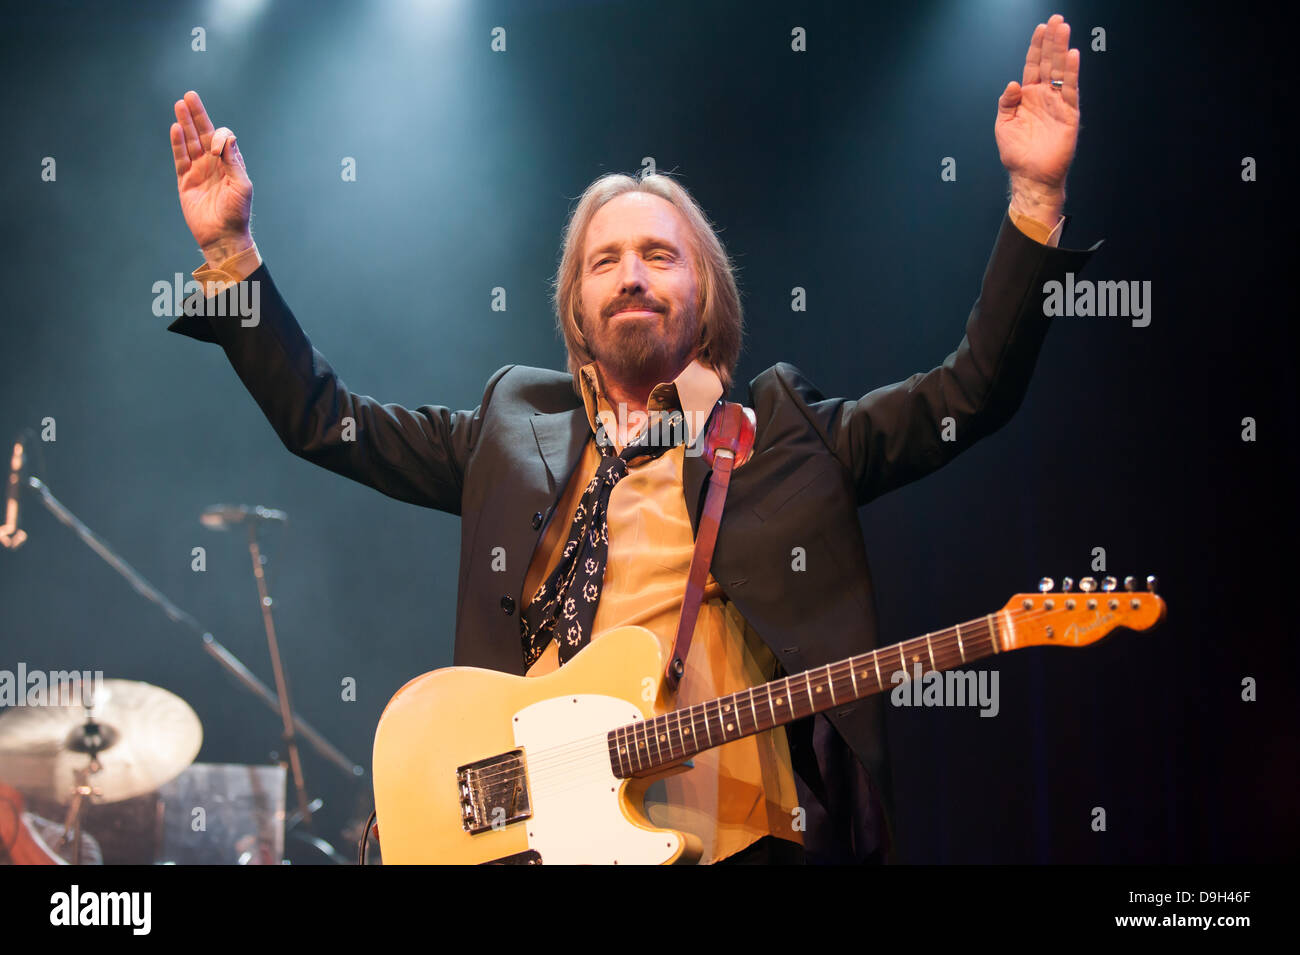 London, Ontario, Canada. 19th June, 2013. Tom Petty and The Heartbreakers perform at Budweiser Gardens in London Ontario, on June 18, 2013. The sold out concert was the only Canadian date on the bands 2013 concert tour. Credit:  Mark Spowart/Alamy Live News Stock Photo